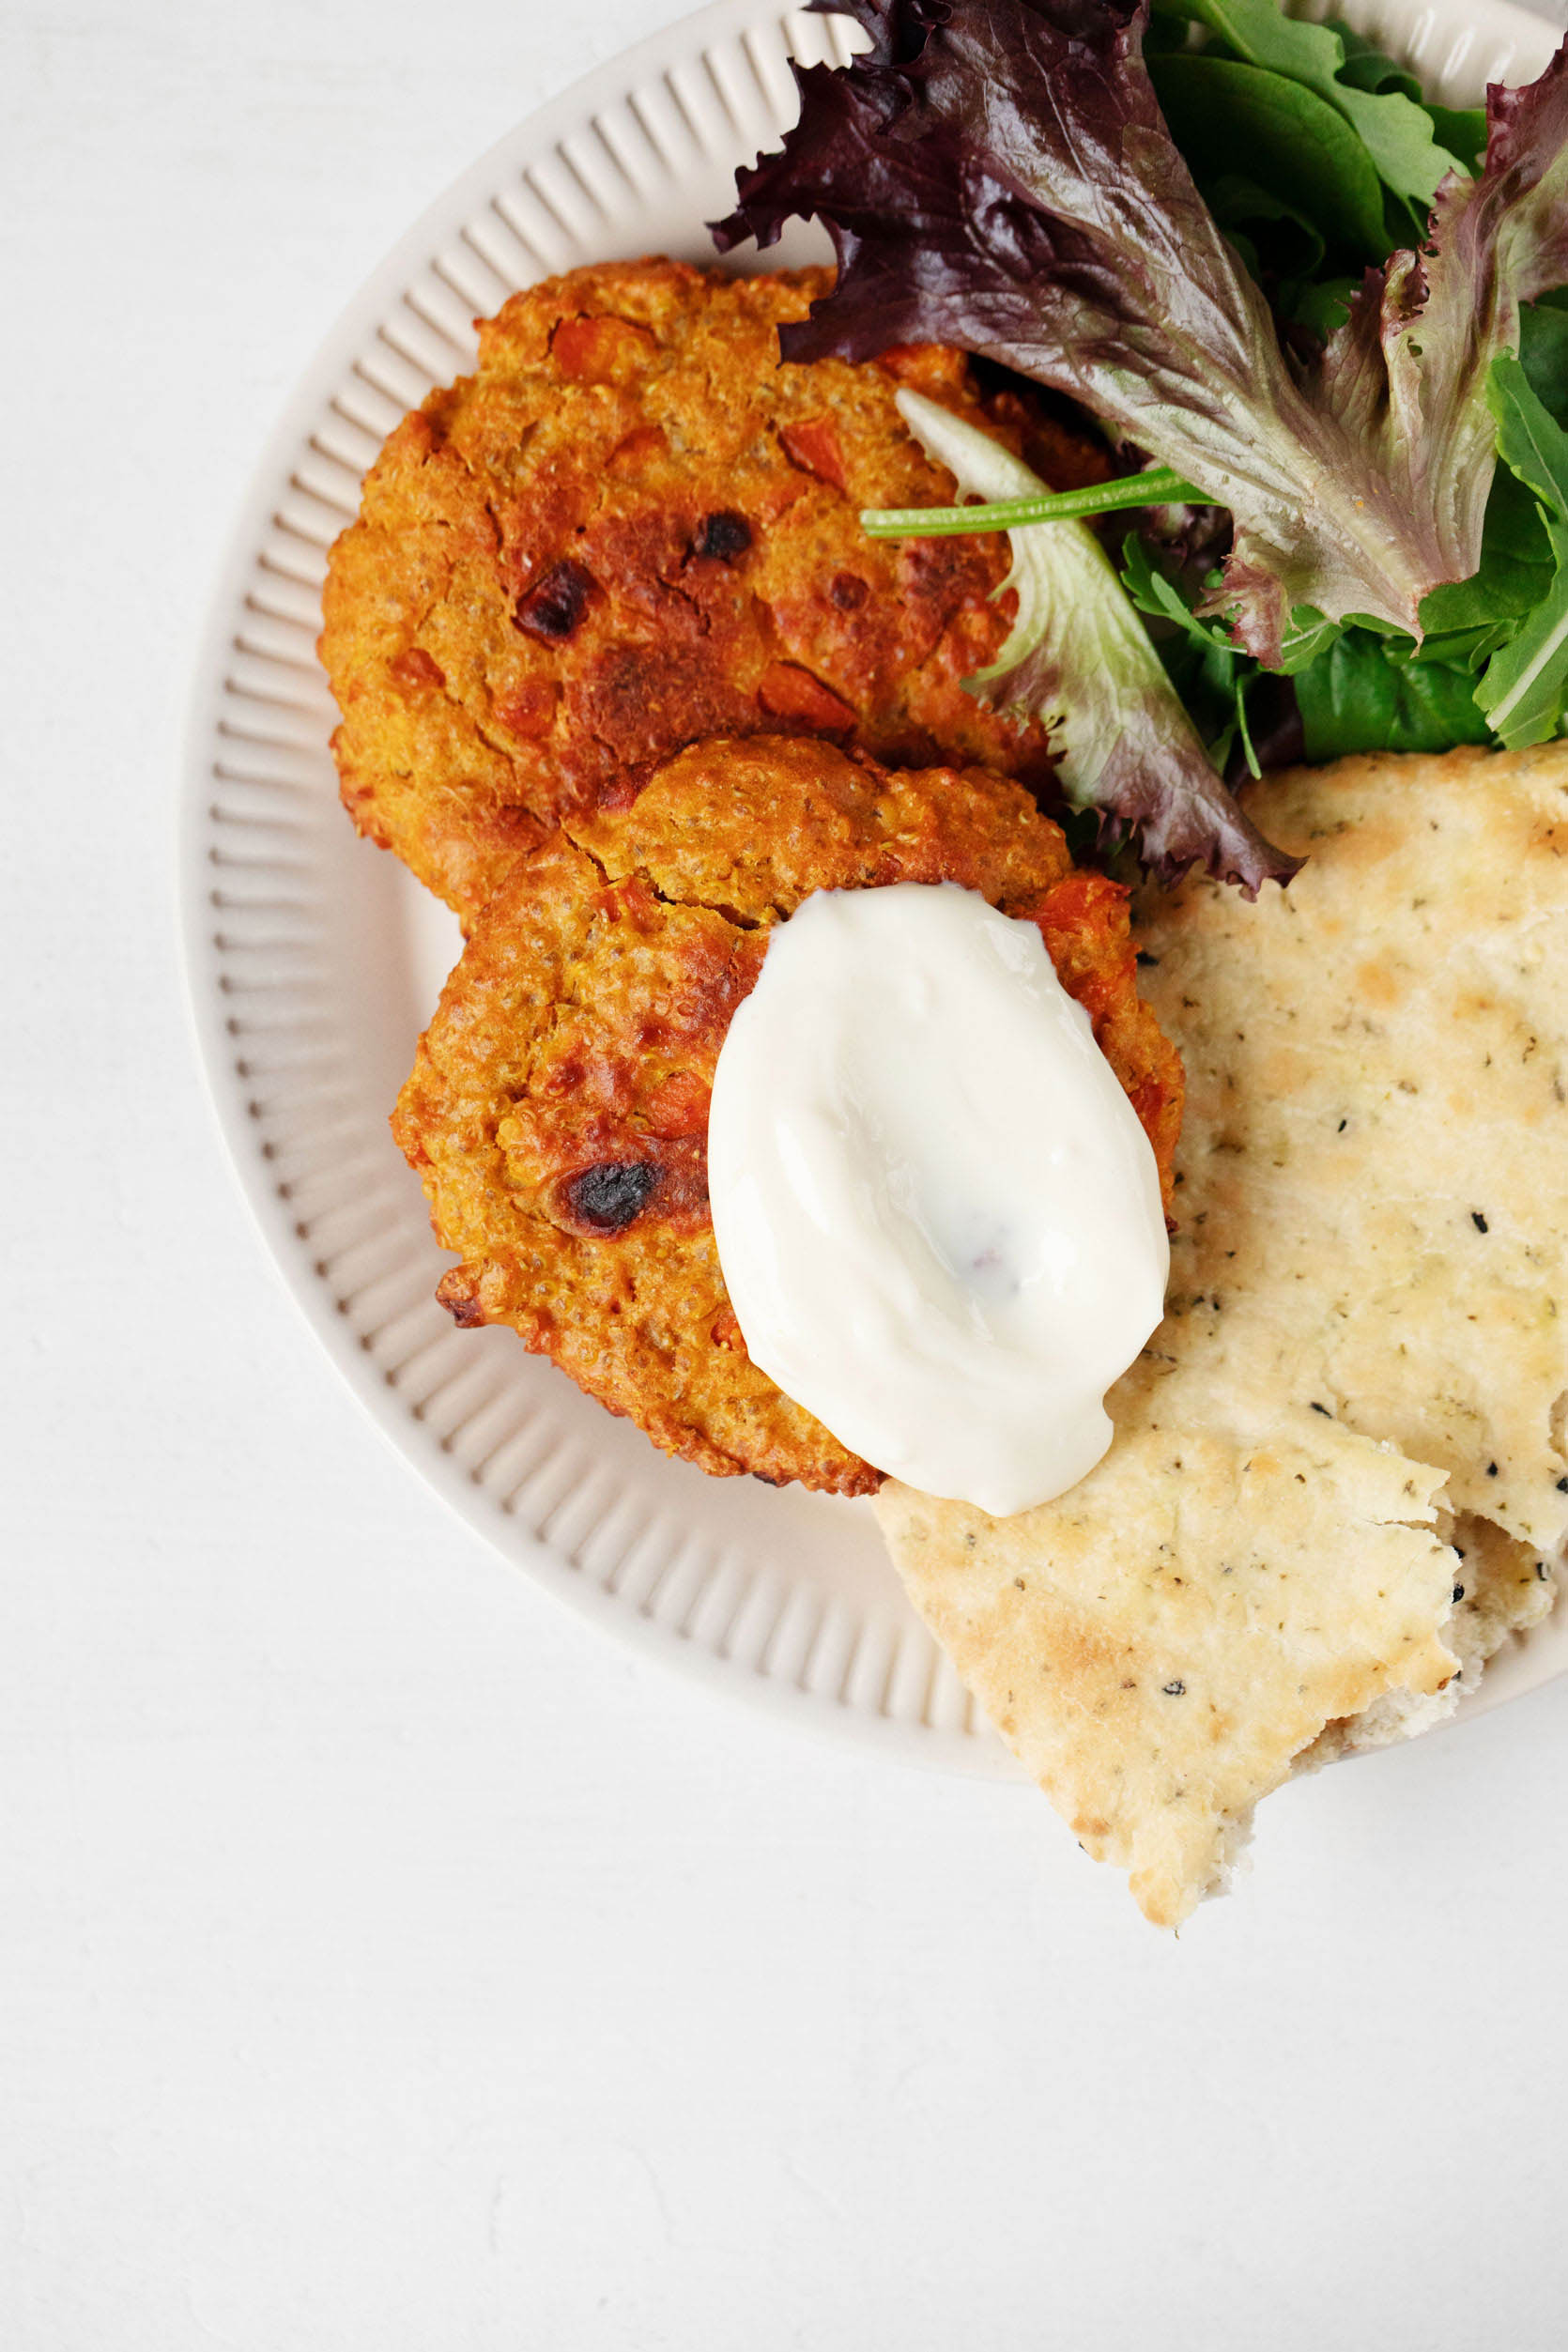 Curried Lentil Vegetable Cakes | The Full Helping